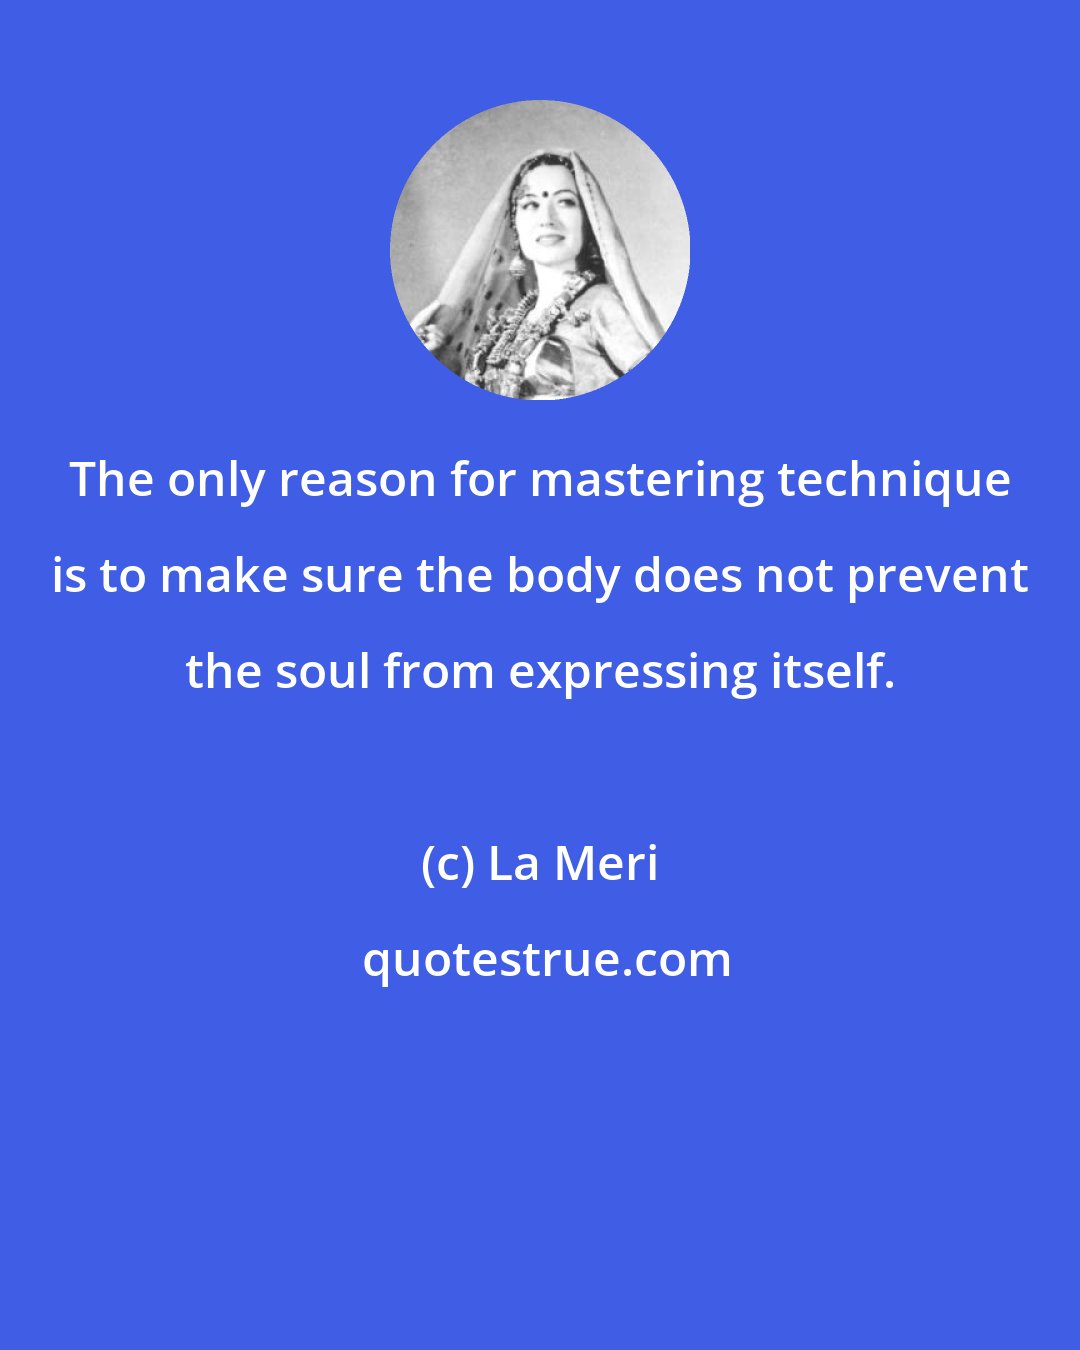 La Meri: The only reason for mastering technique is to make sure the body does not prevent the soul from expressing itself.